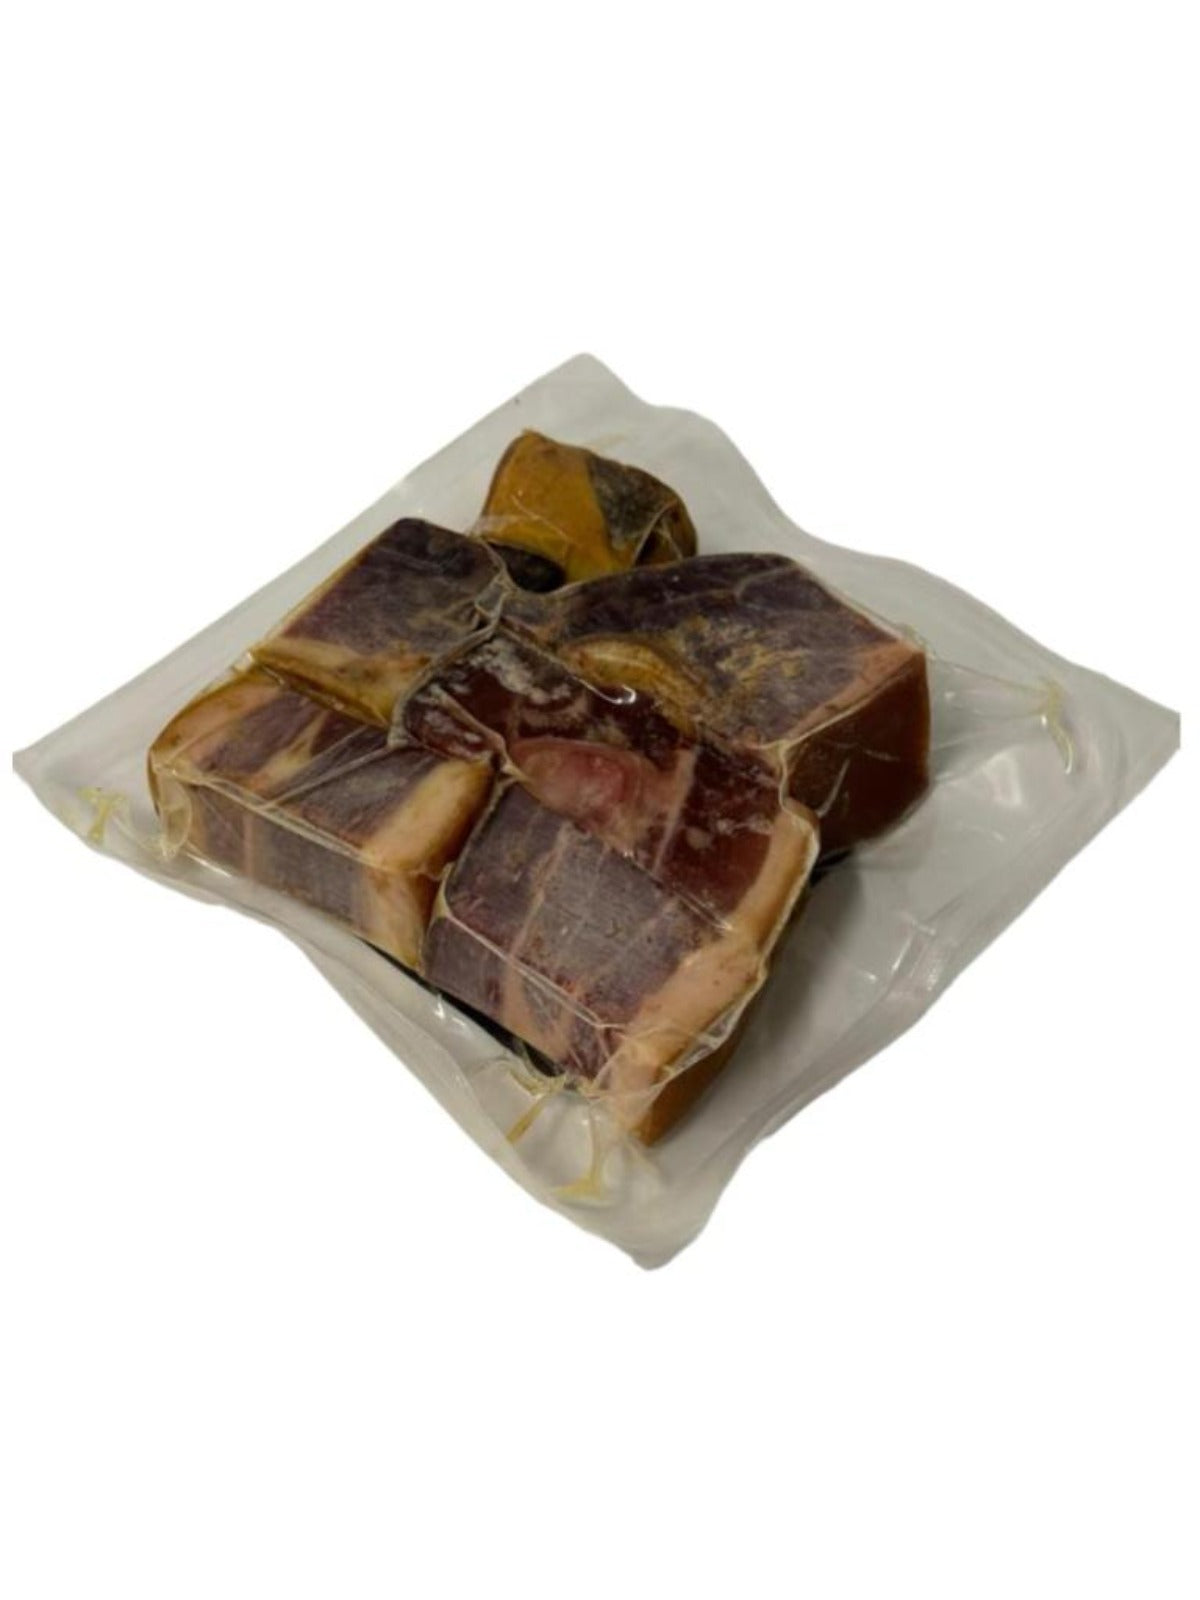 Puntas de Jamon packet random weight approx. 200g packet. Regular price $7.00 AUD [You are guaranteed to receive at least 195g of product, equivalent price of $35.90 per kg.]